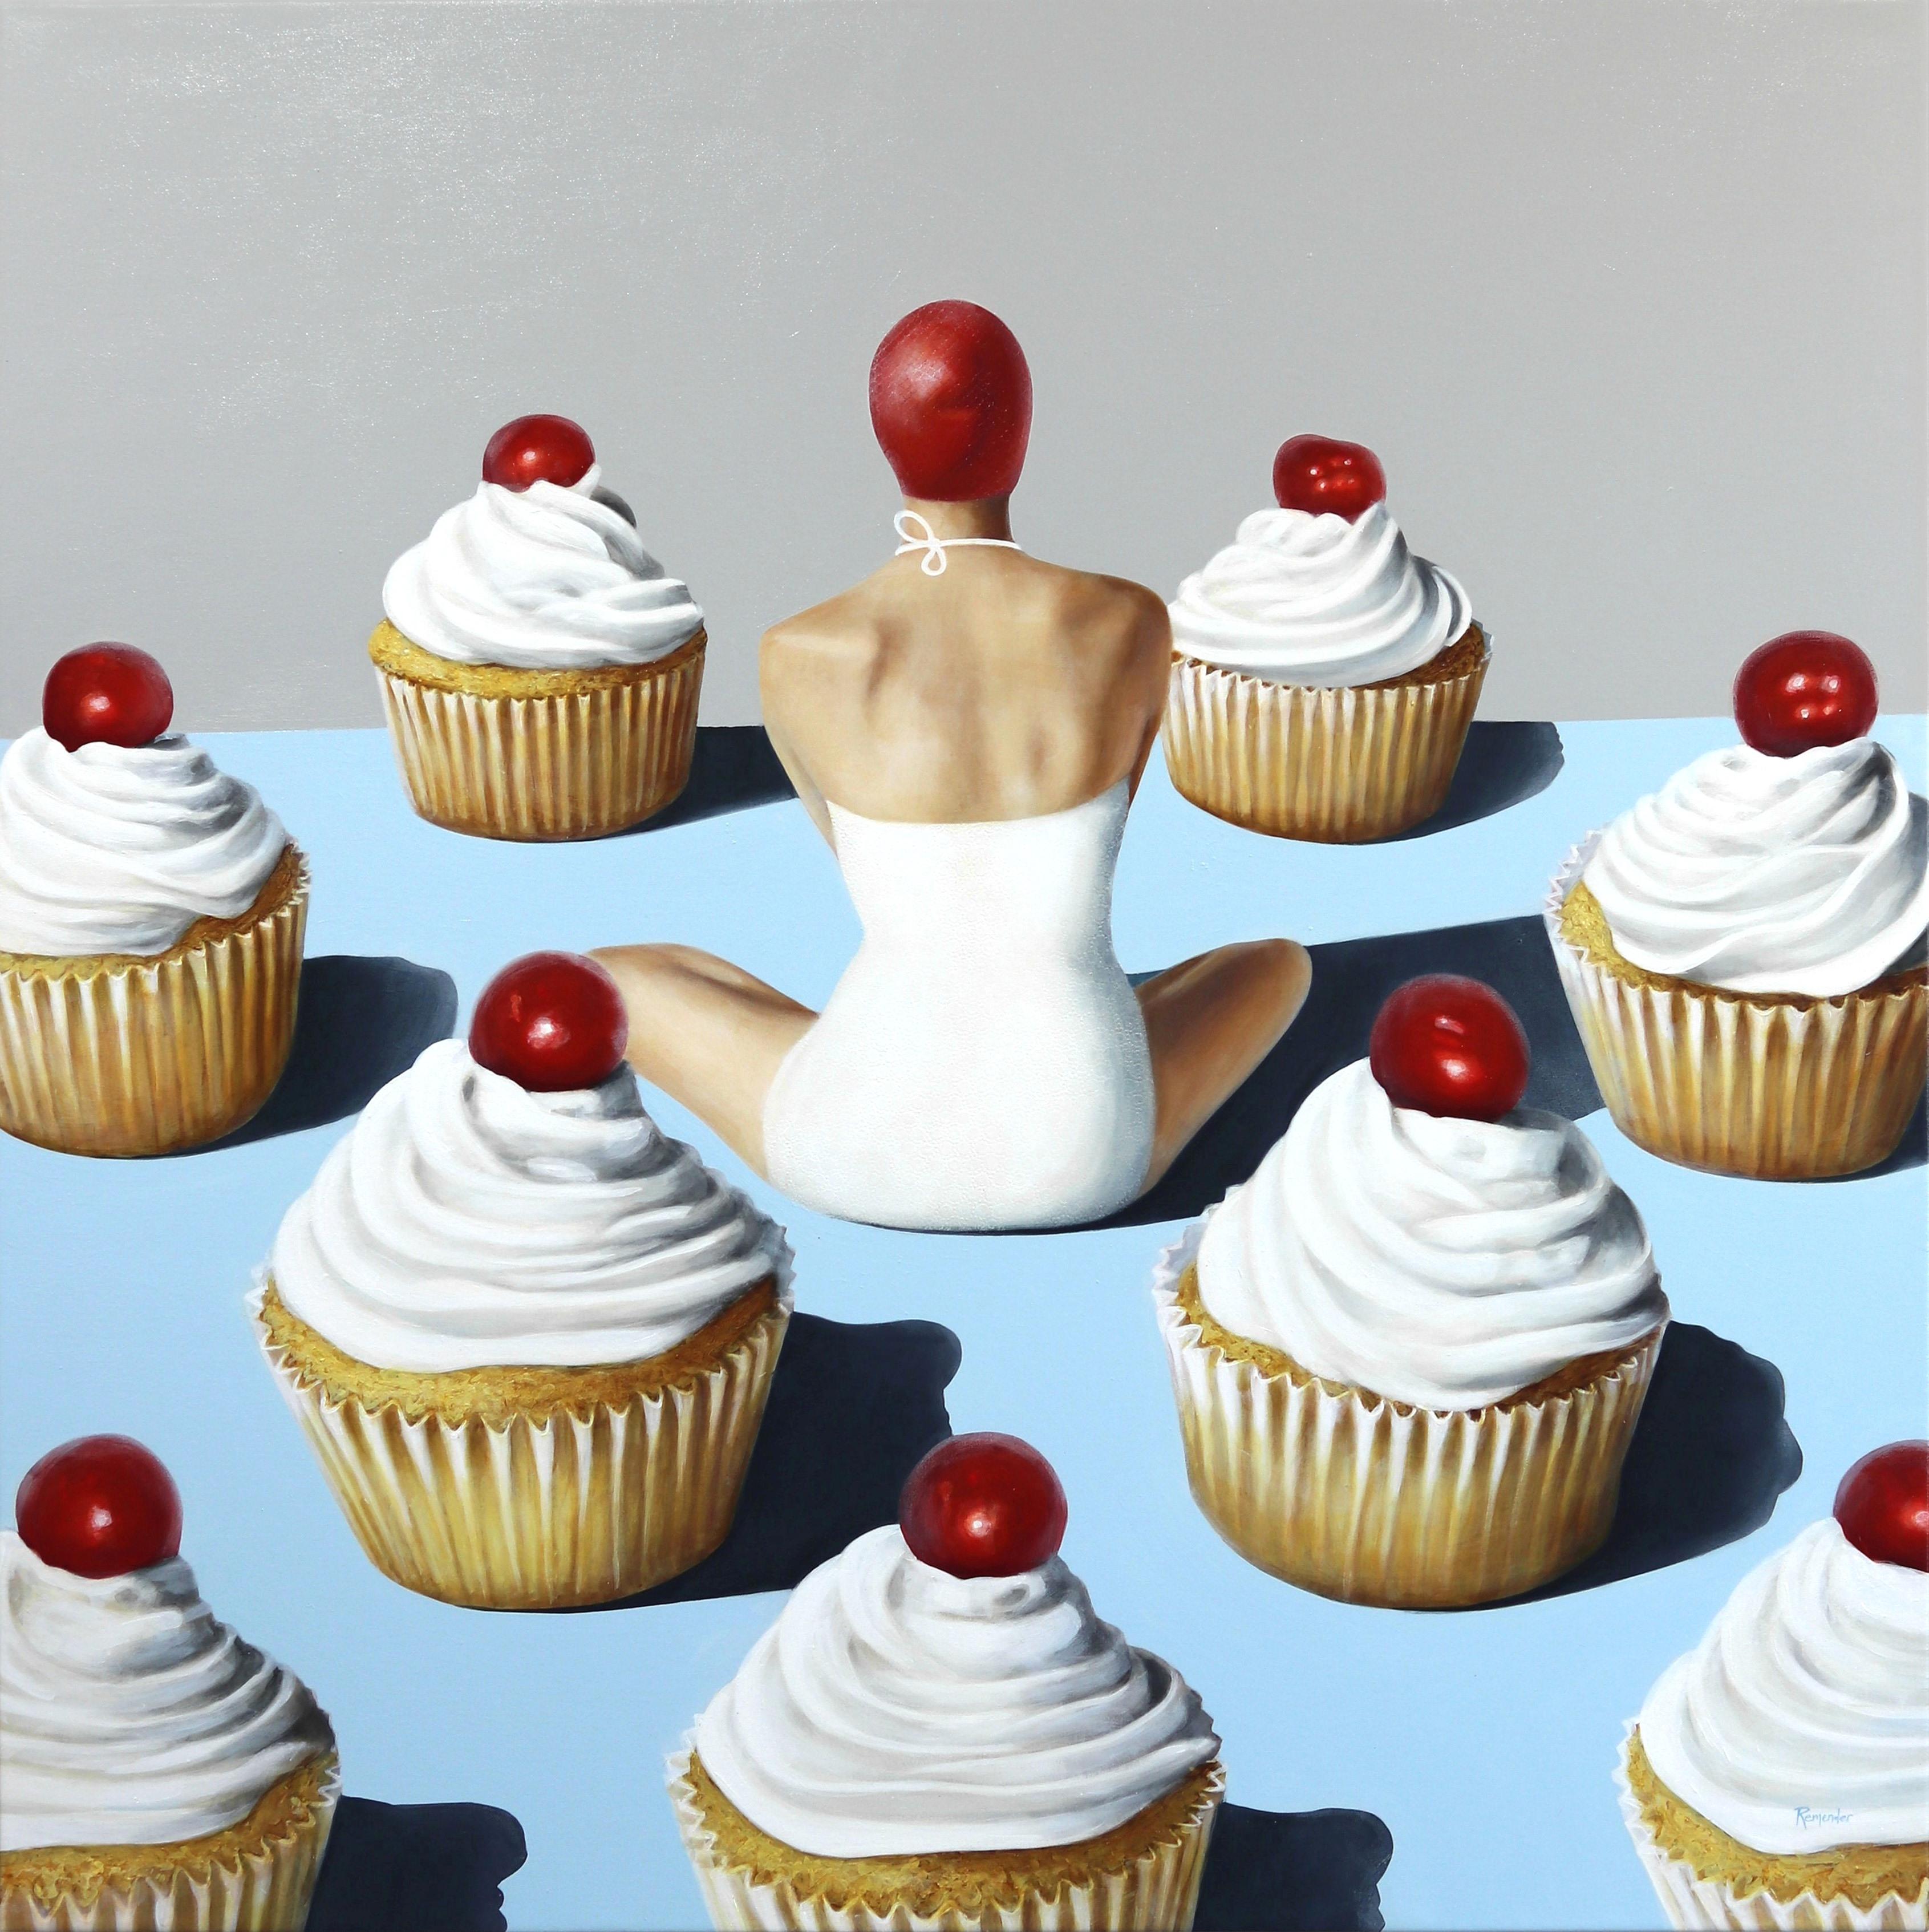 Elise Remender Figurative Painting - Bather and Cupcakes